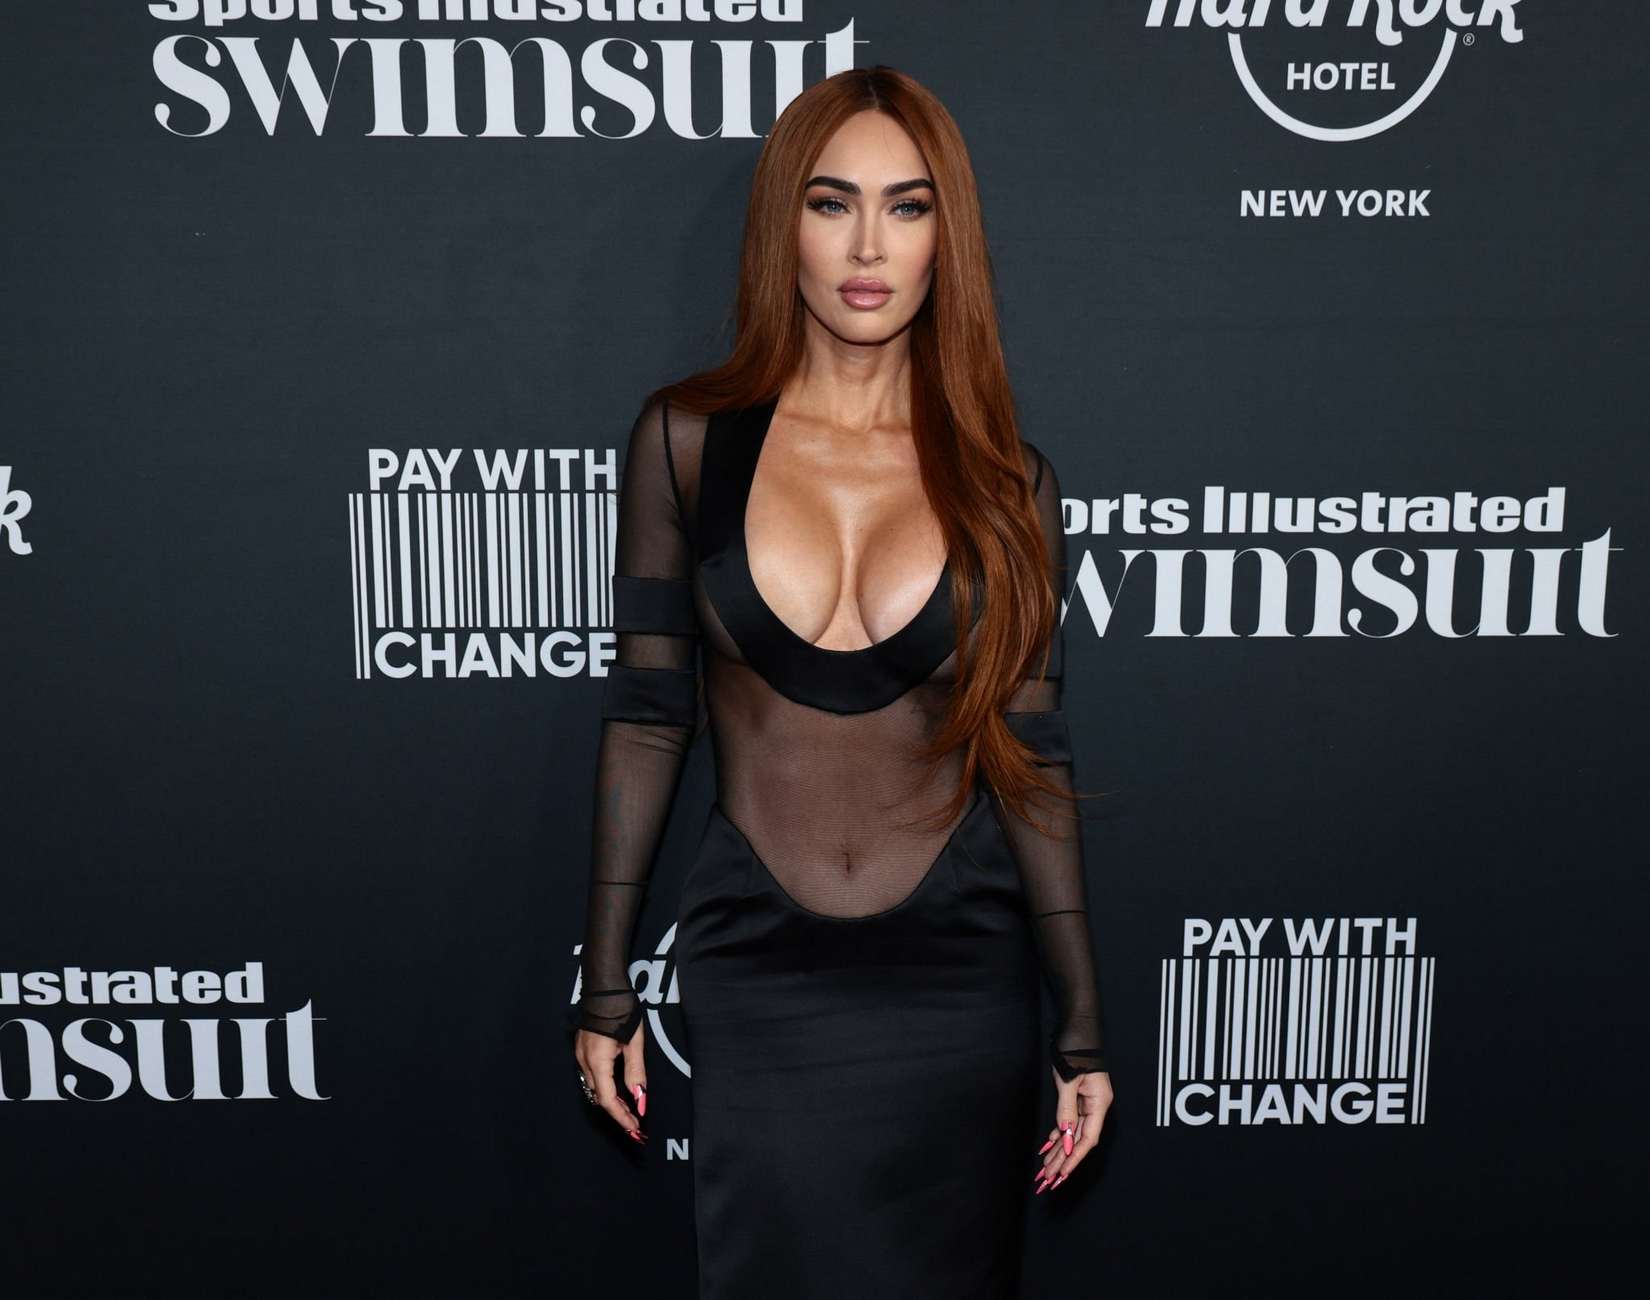 Megan_Fox_-_Sports_Illustrated_swimsuit_launch_event_in_New_York_May_182C_202368.jpg